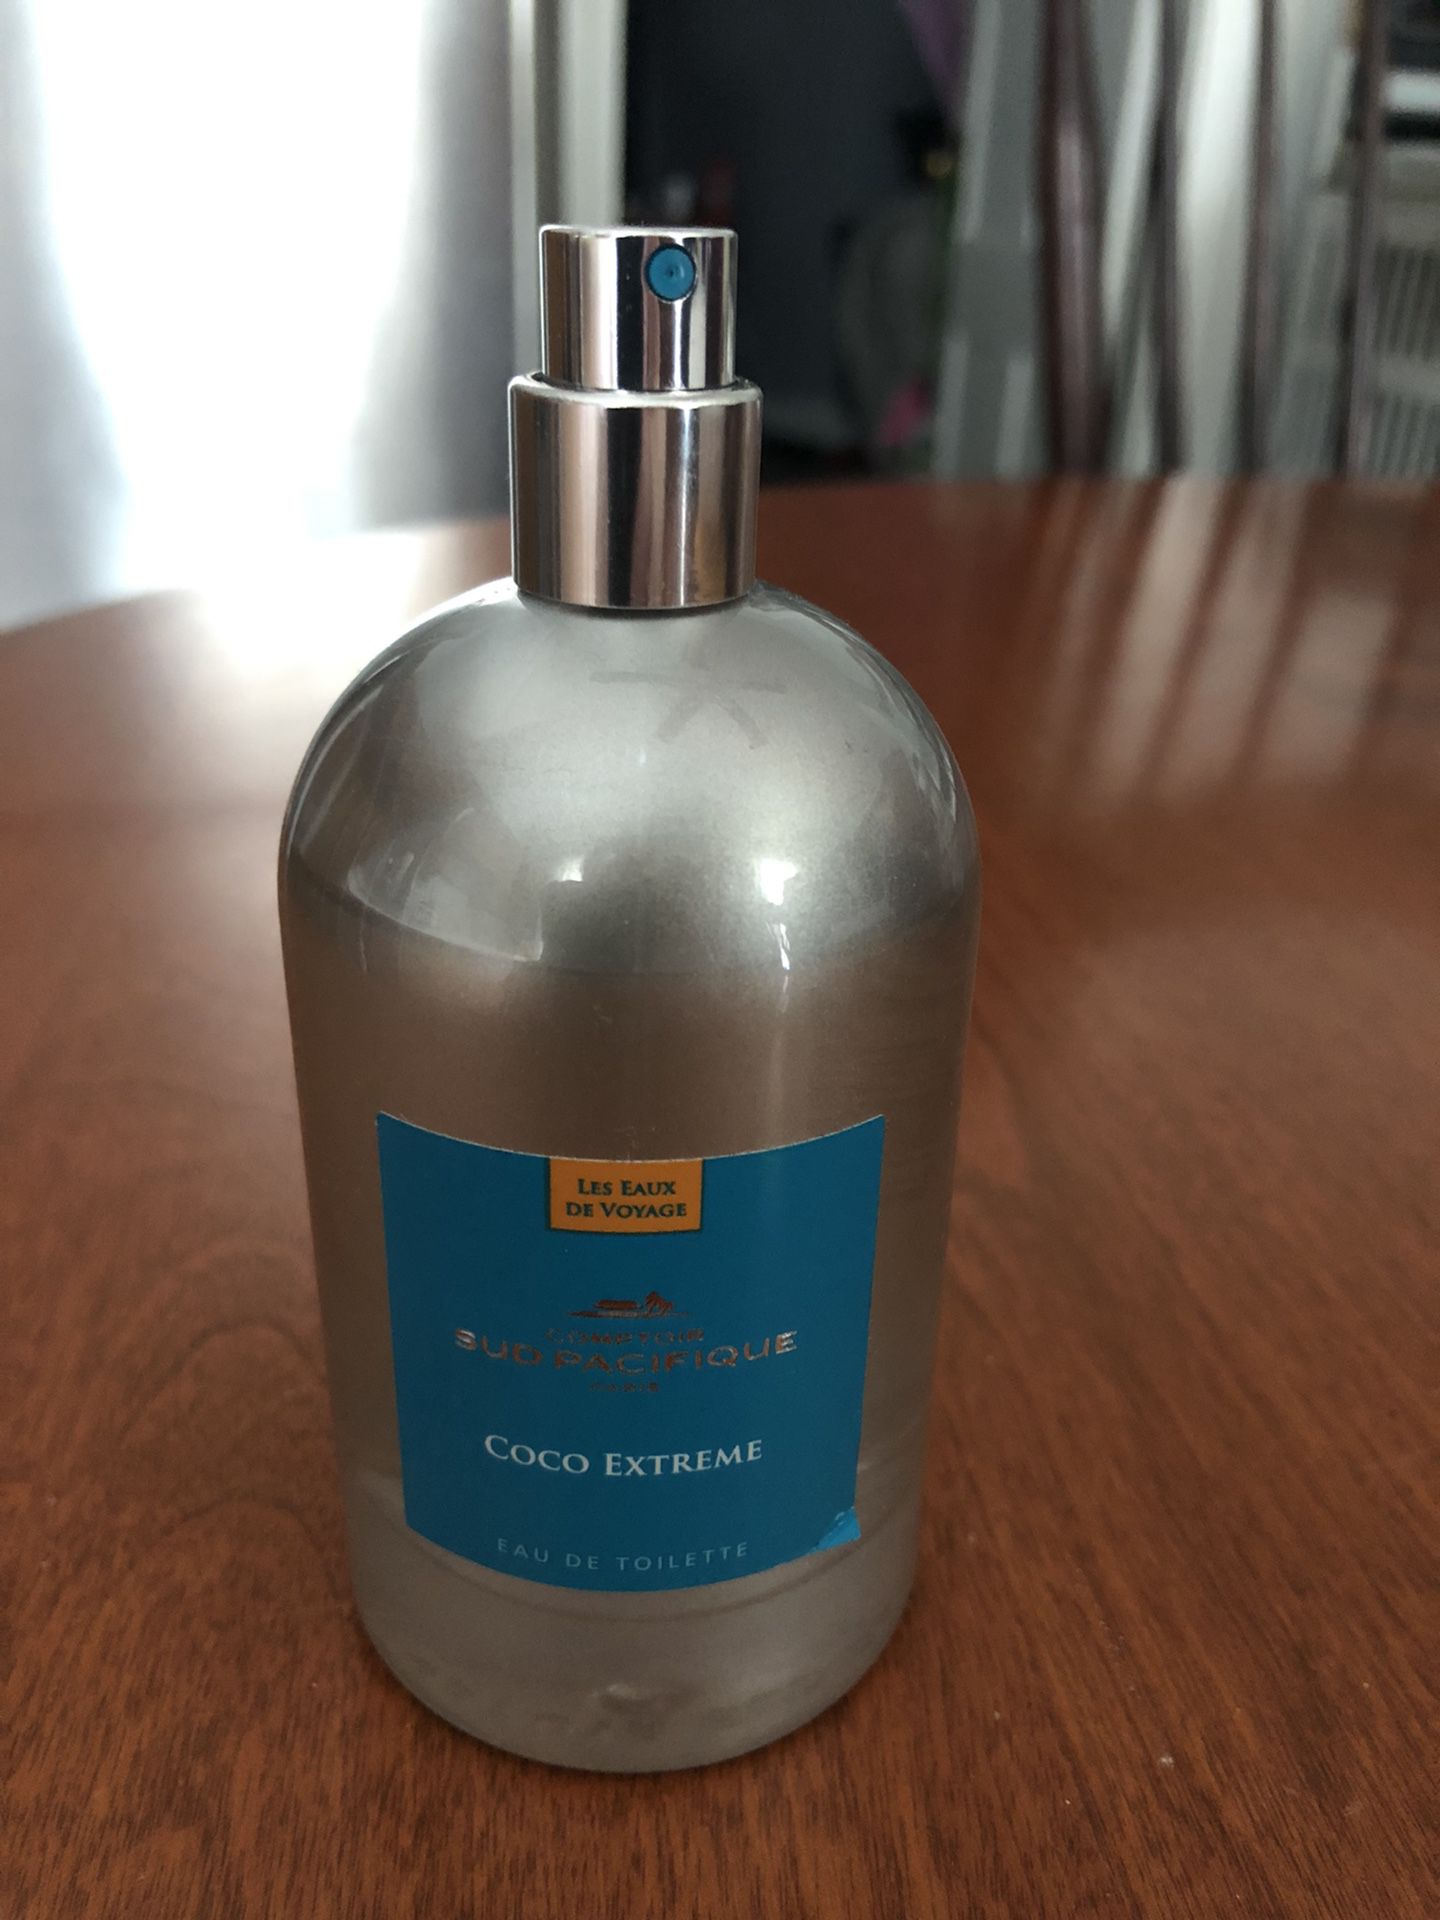 Comptoir Sud Pacifique Coco Extreme Perfume for Sale in Fitchburg